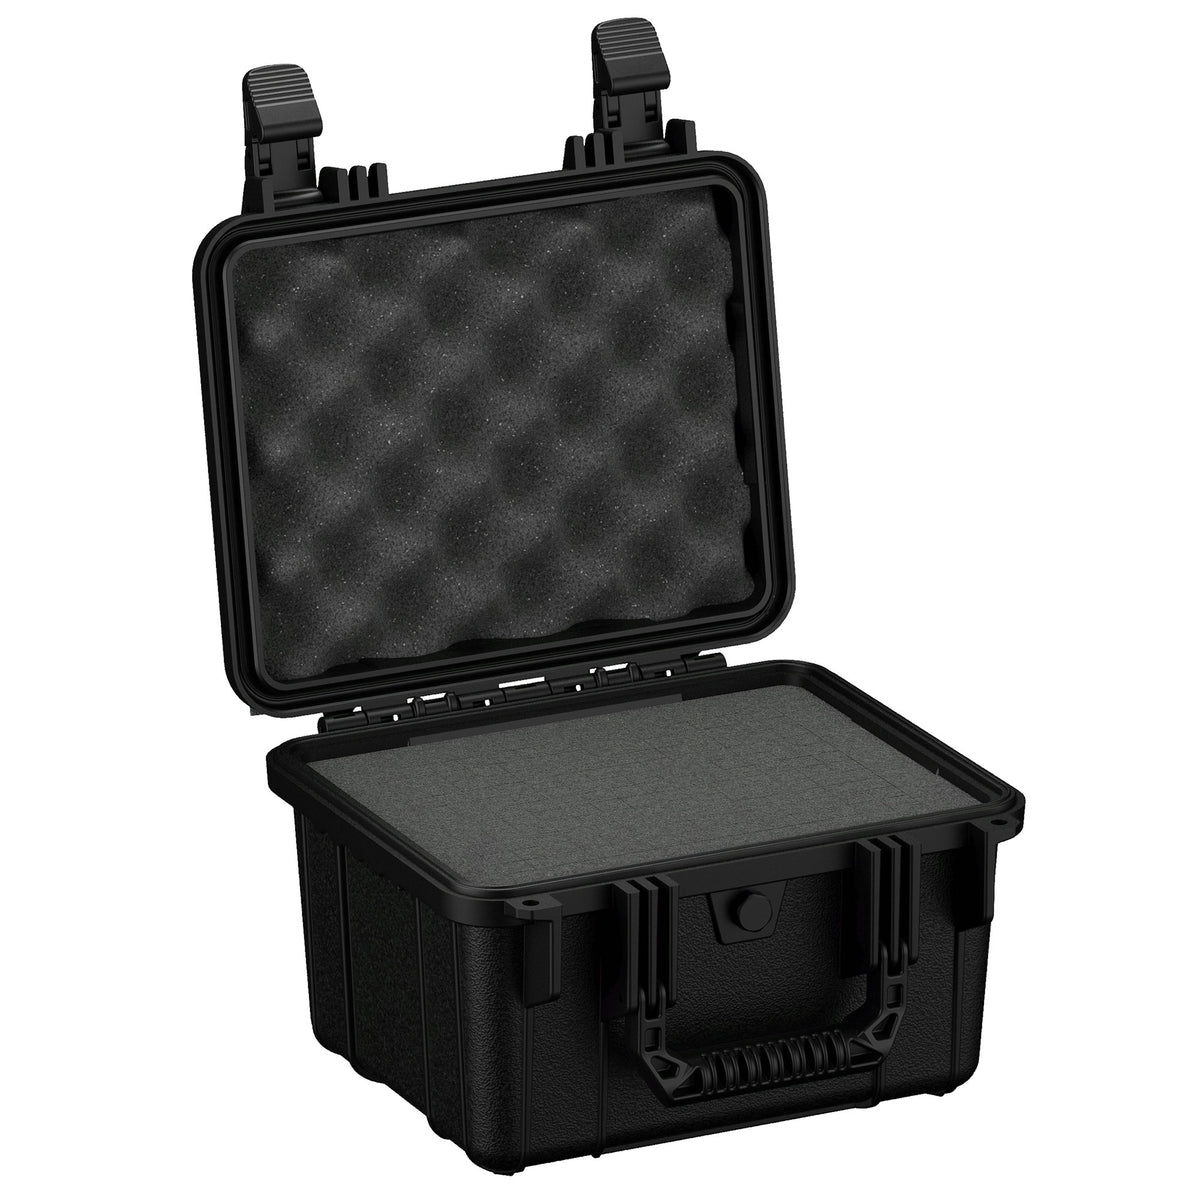 Waterproof Hard Carrying Cases - Small Cases to Large Cases on Wheels